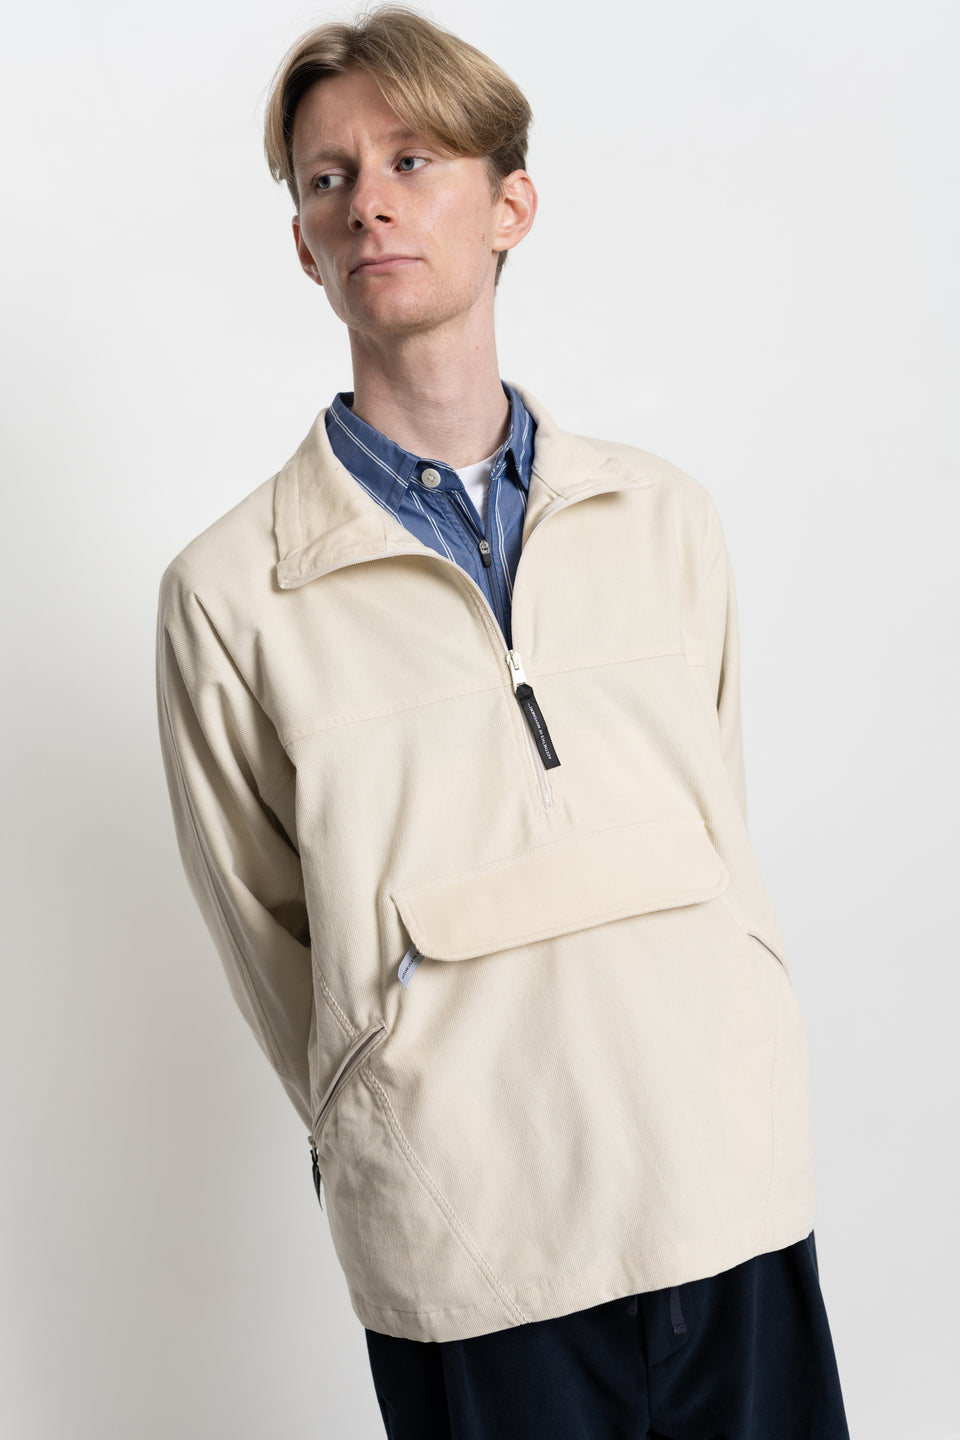 Venturon France FW23 Men's Collection Som 1st Jacket Off White Calculus Victoria BC Canada